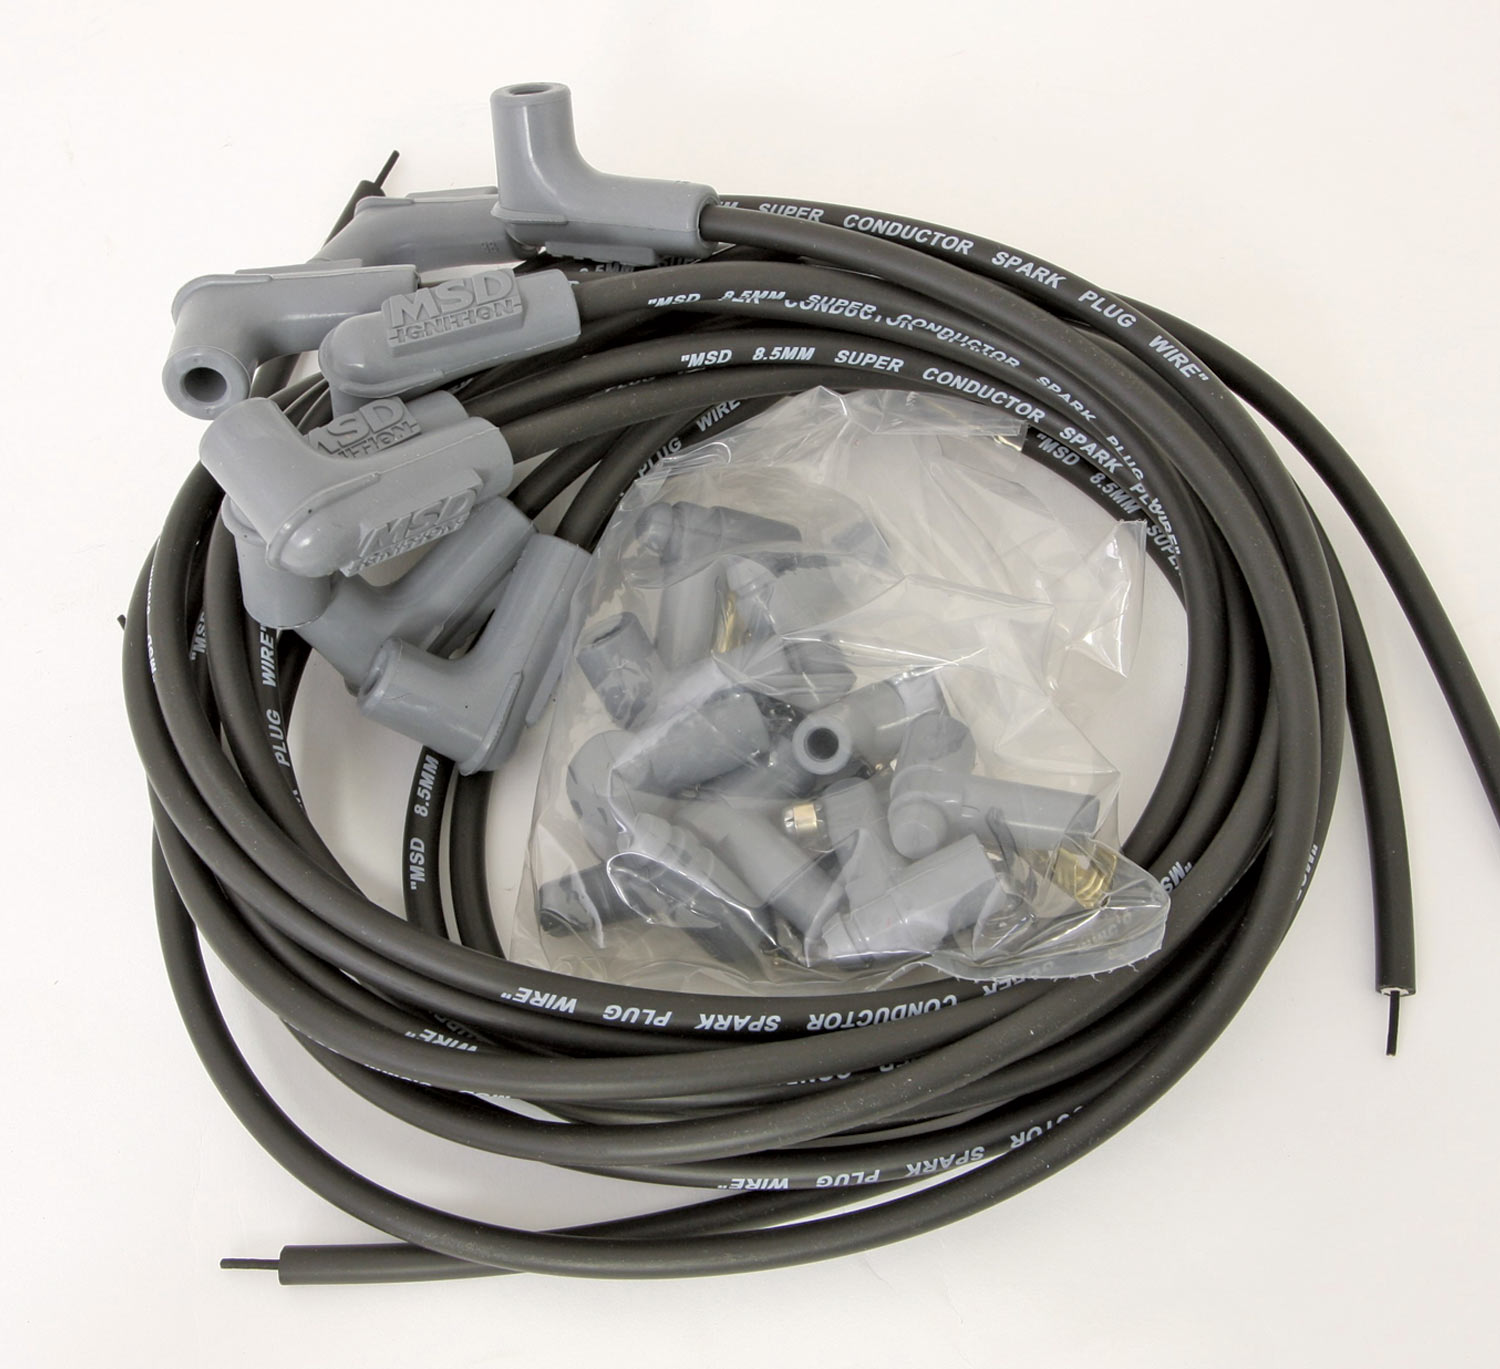 view of a pile of spark plug wires (PN MSD-35593), yet to be installed